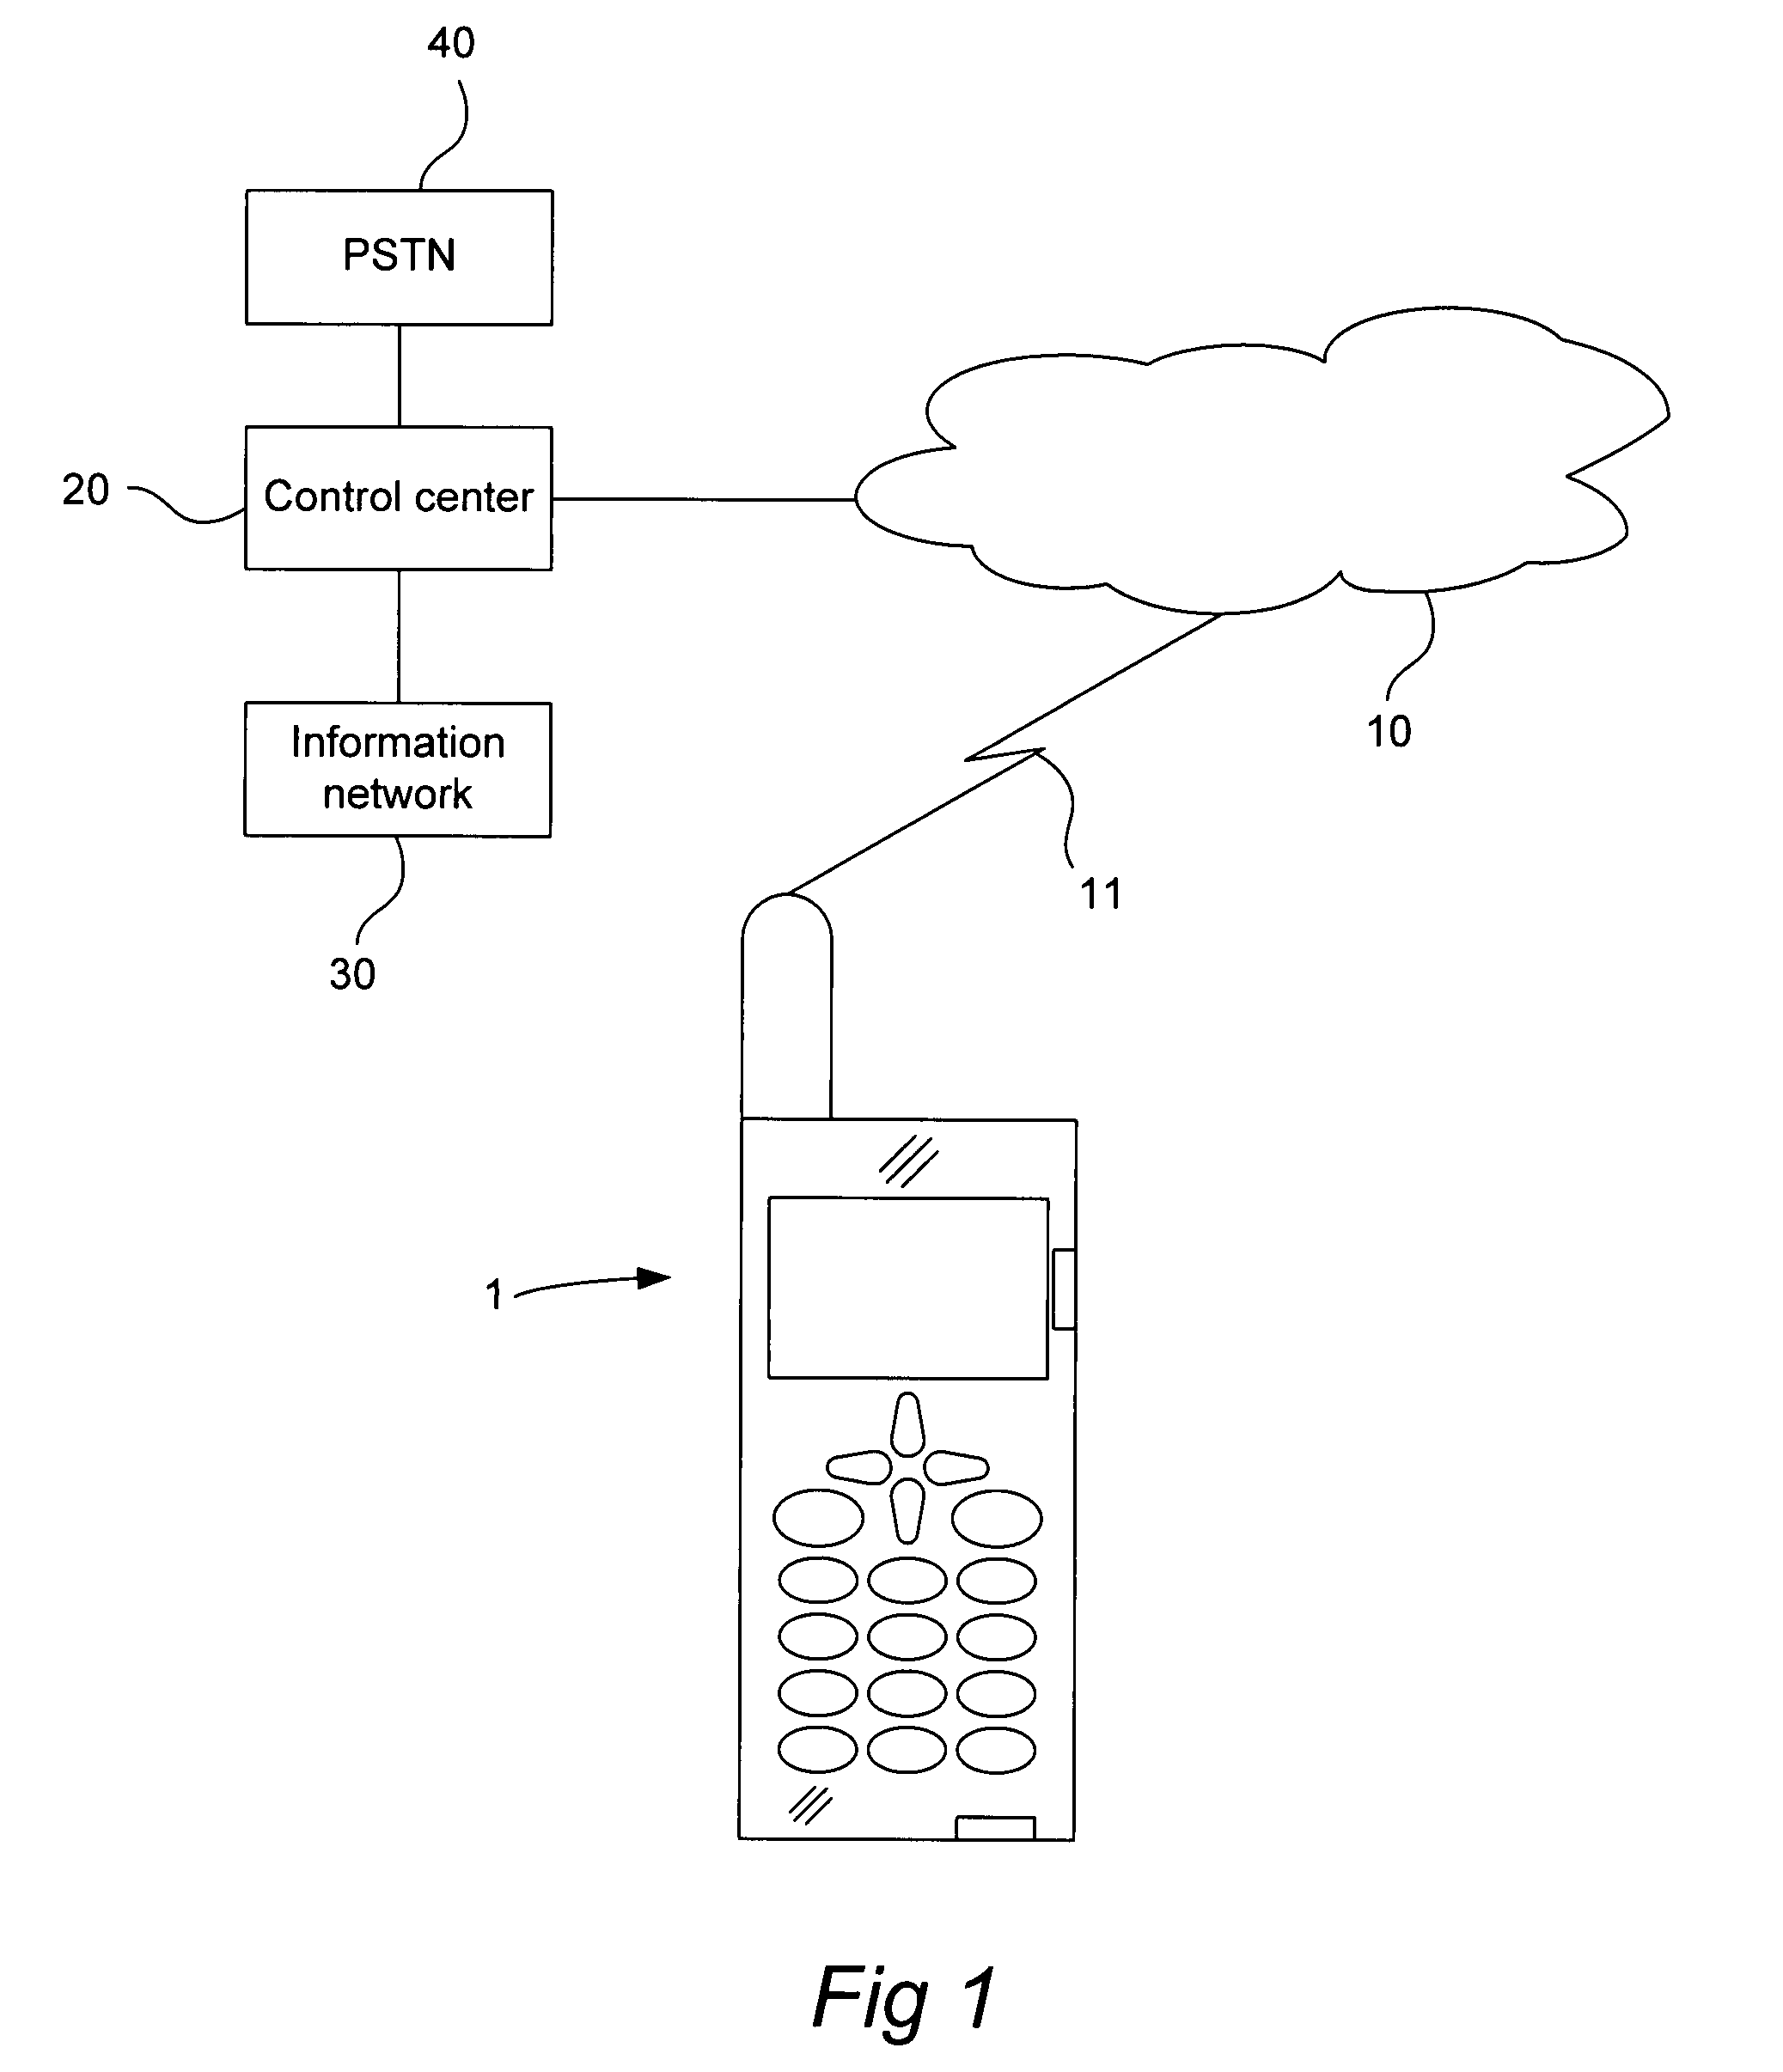 Method for Disabling a Mobile Device